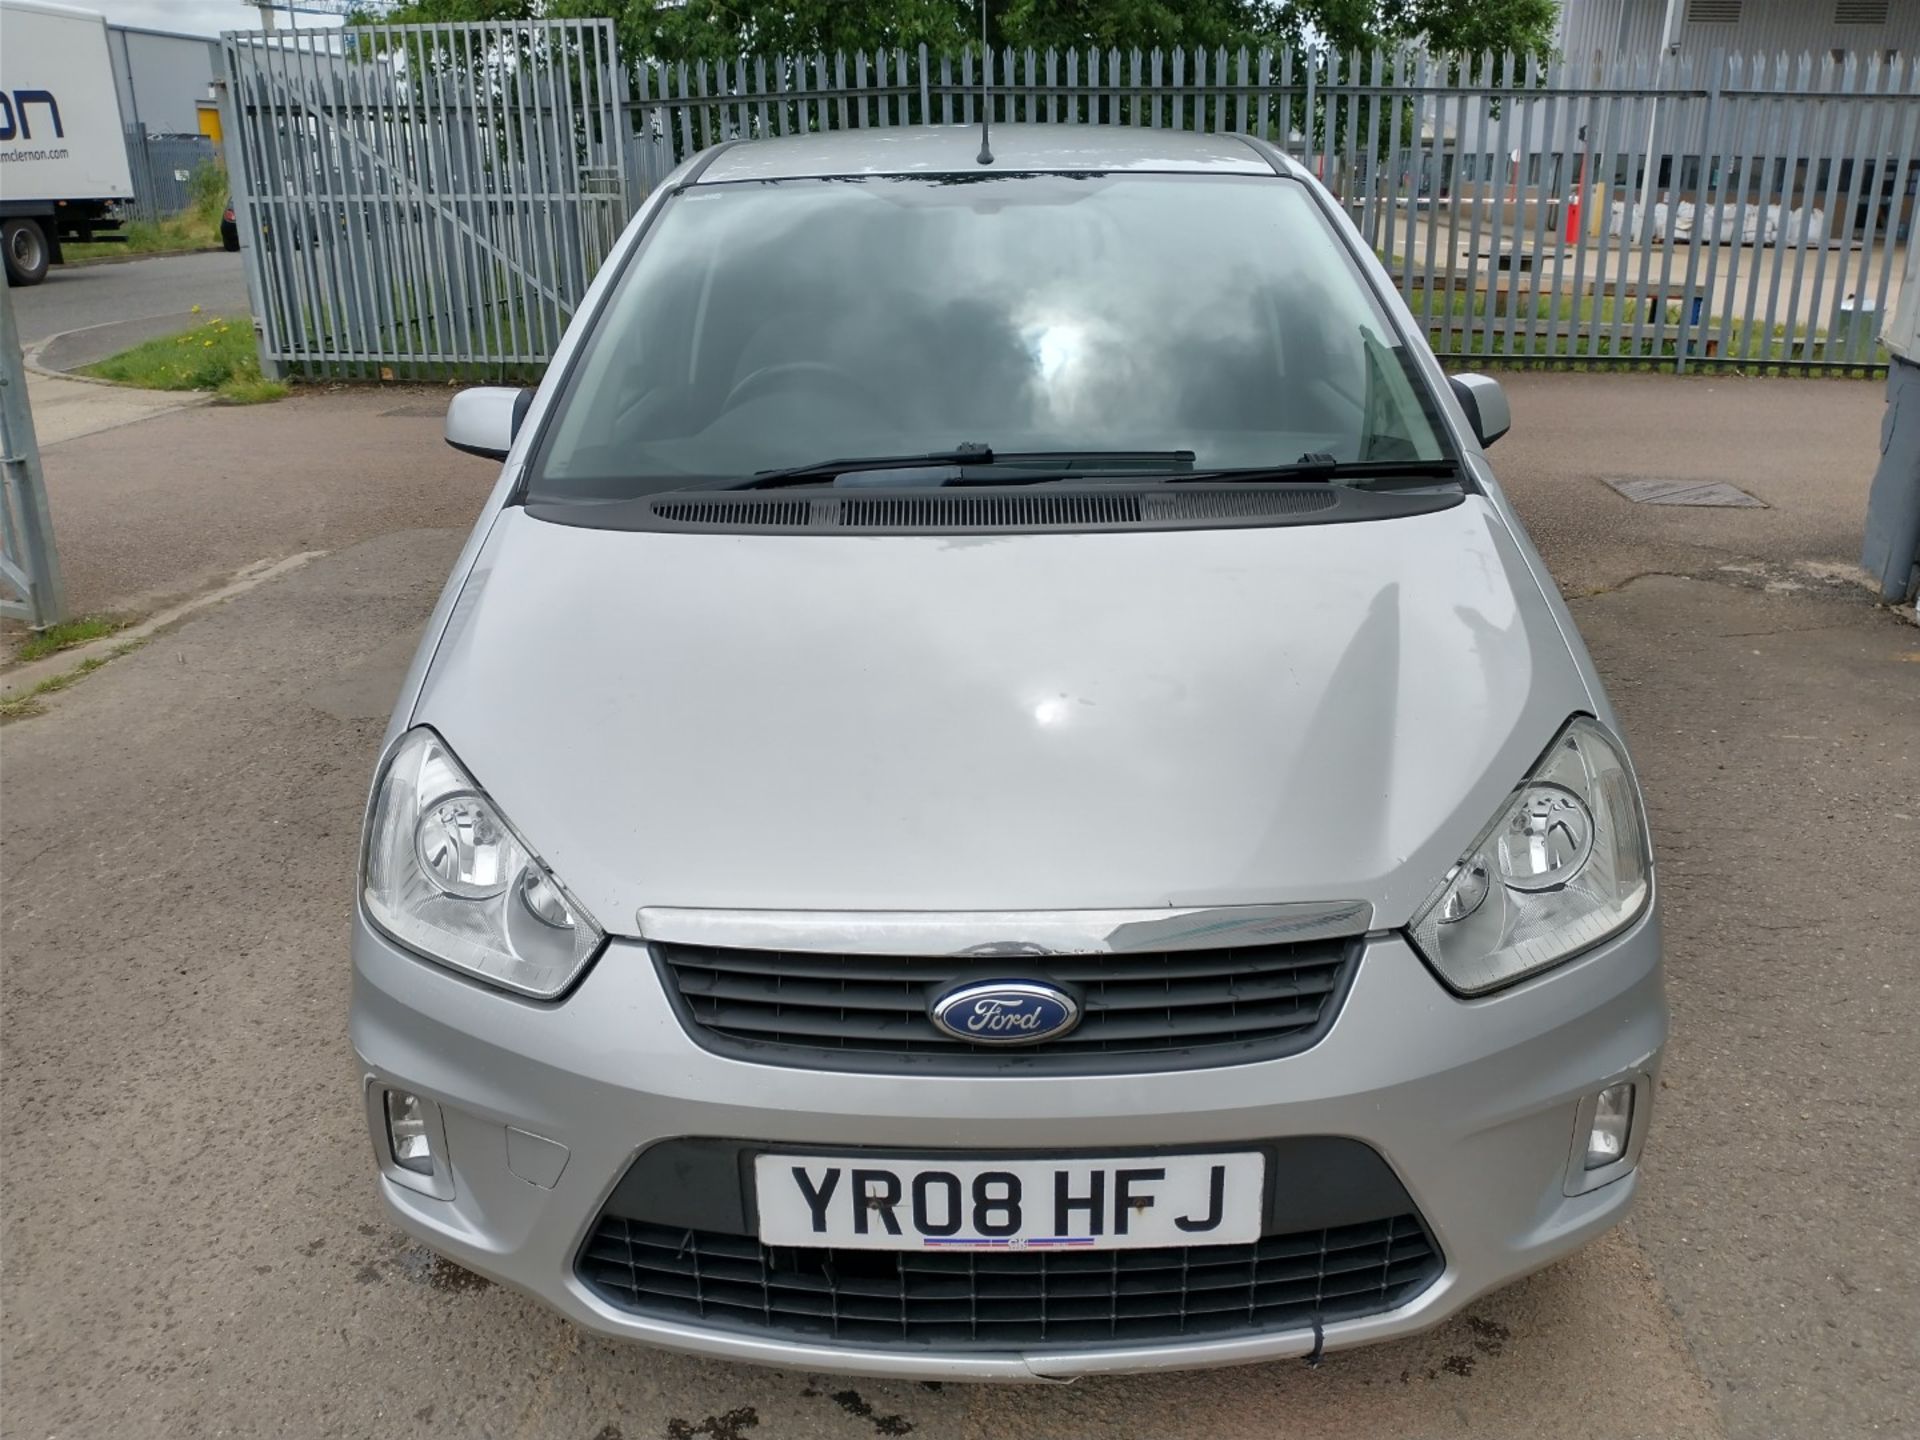 2008 Ford C-Max Zetec MPV 5dr 1.8 Petrol - CL505 - NO VAT ON THE HAMMER - Location: Corby - Image 3 of 17